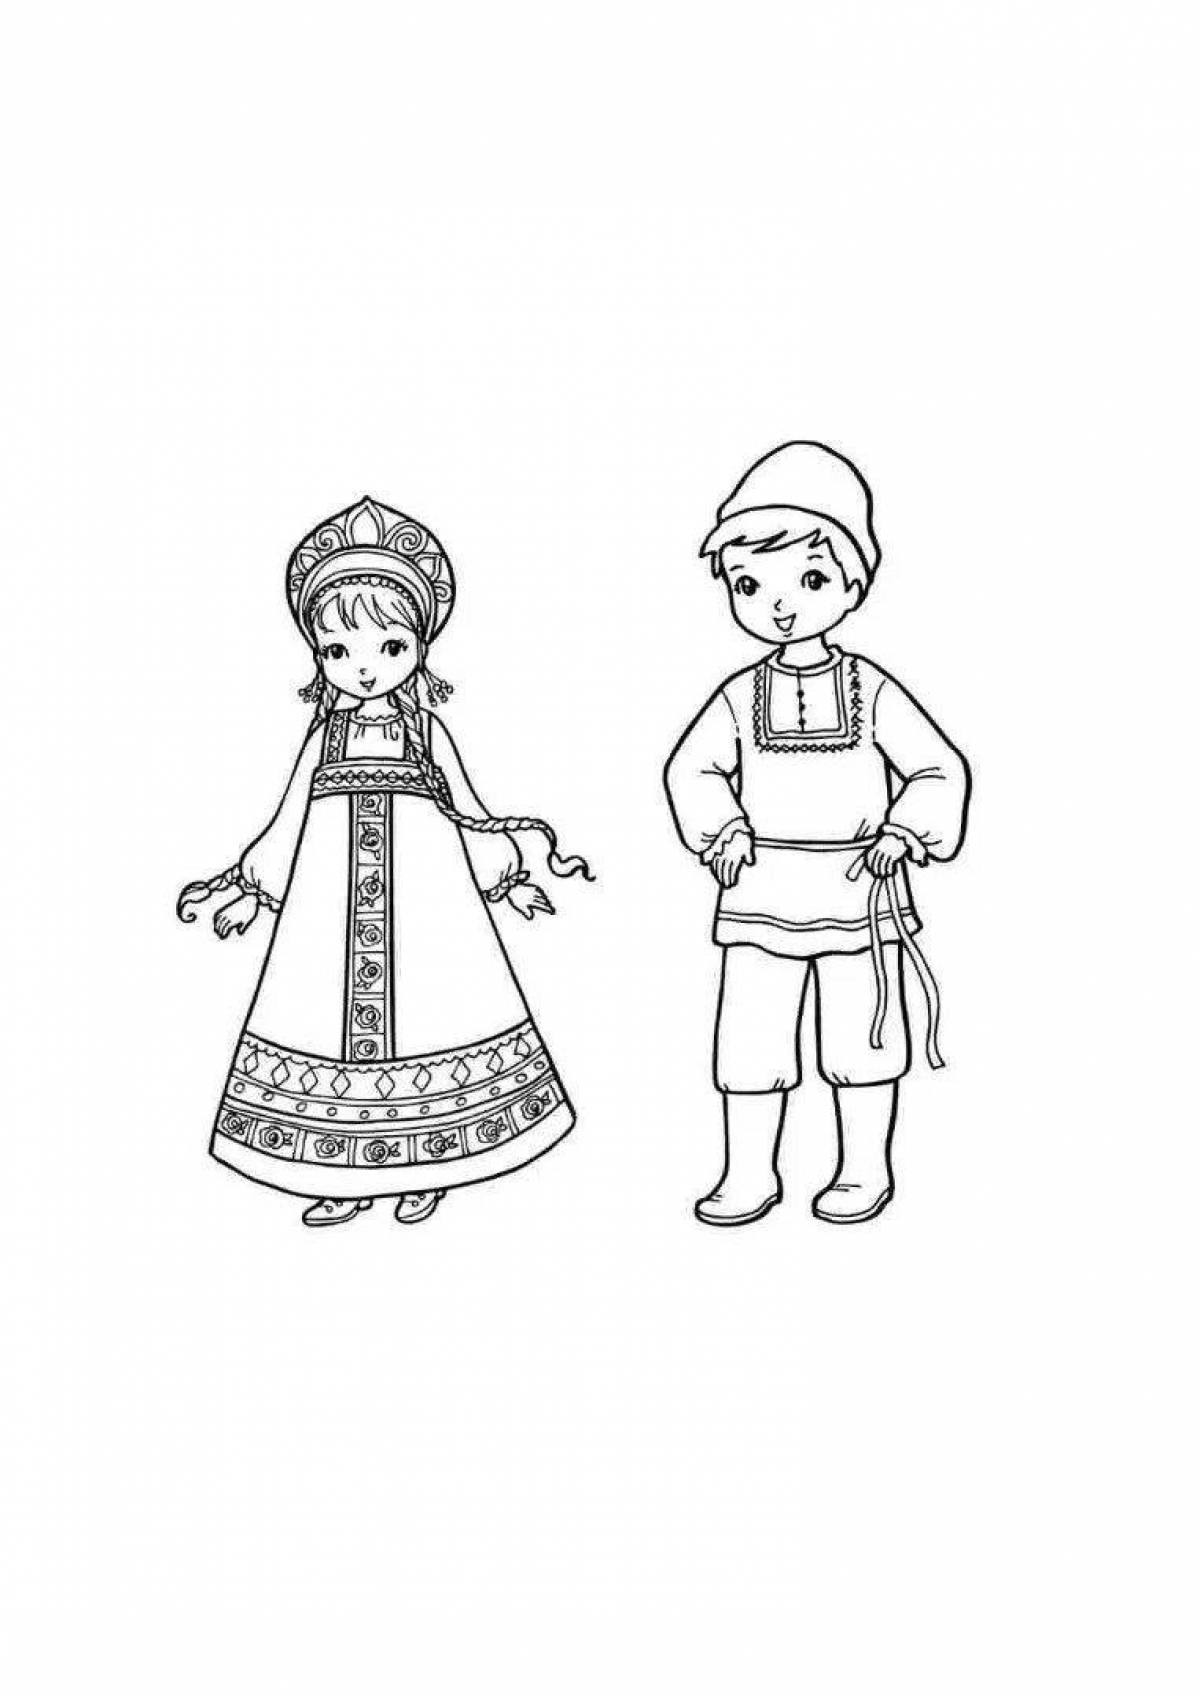 Coloring book playful Chuvash costume